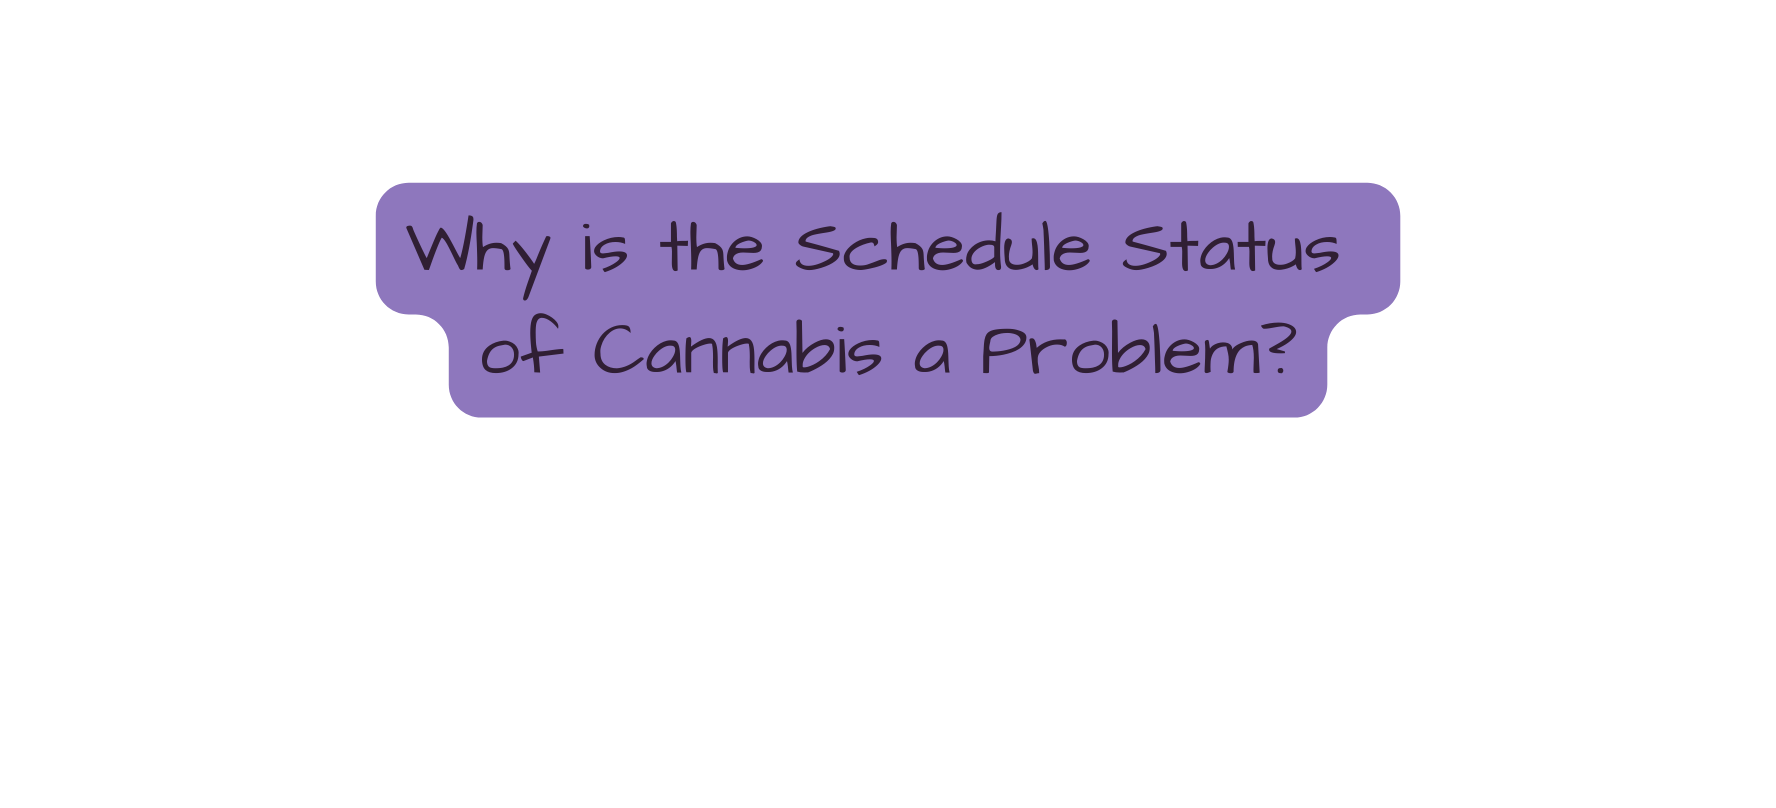 Why is the Schedule Status of Cannabis a Problem